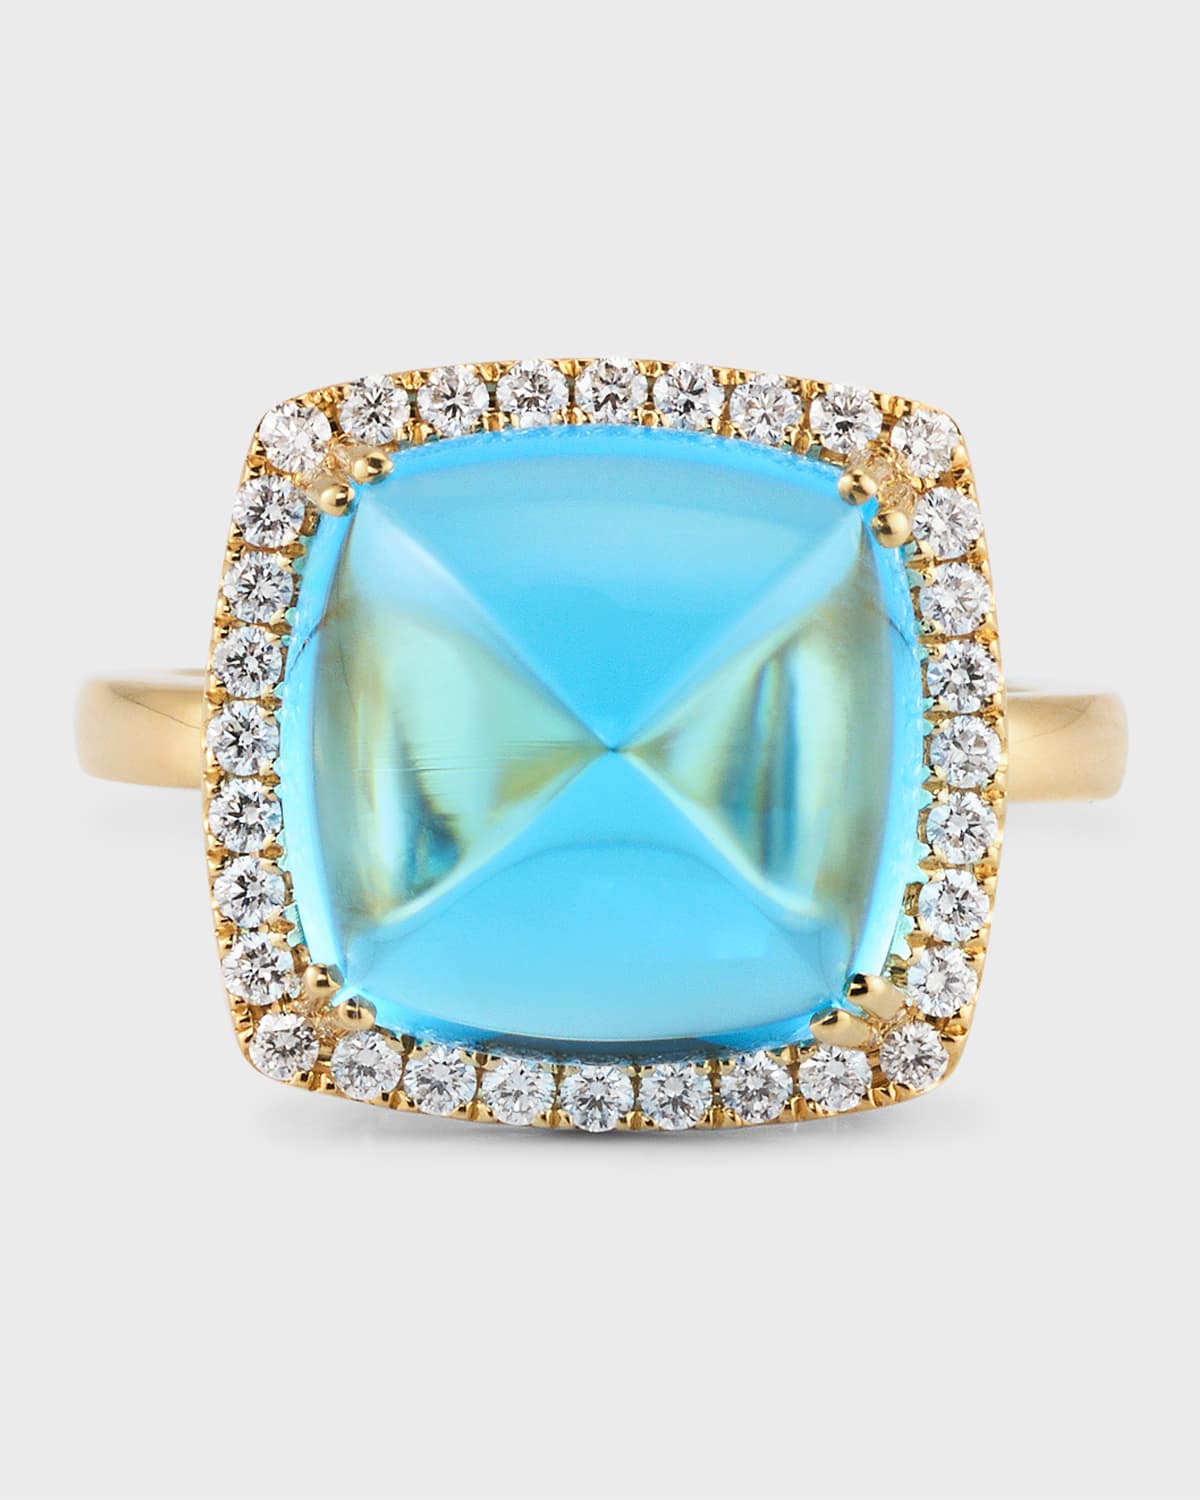 18K Yellow Gold Ring with Swiss Blue Topaz and Diamonds, Size 7, 11.32tcw